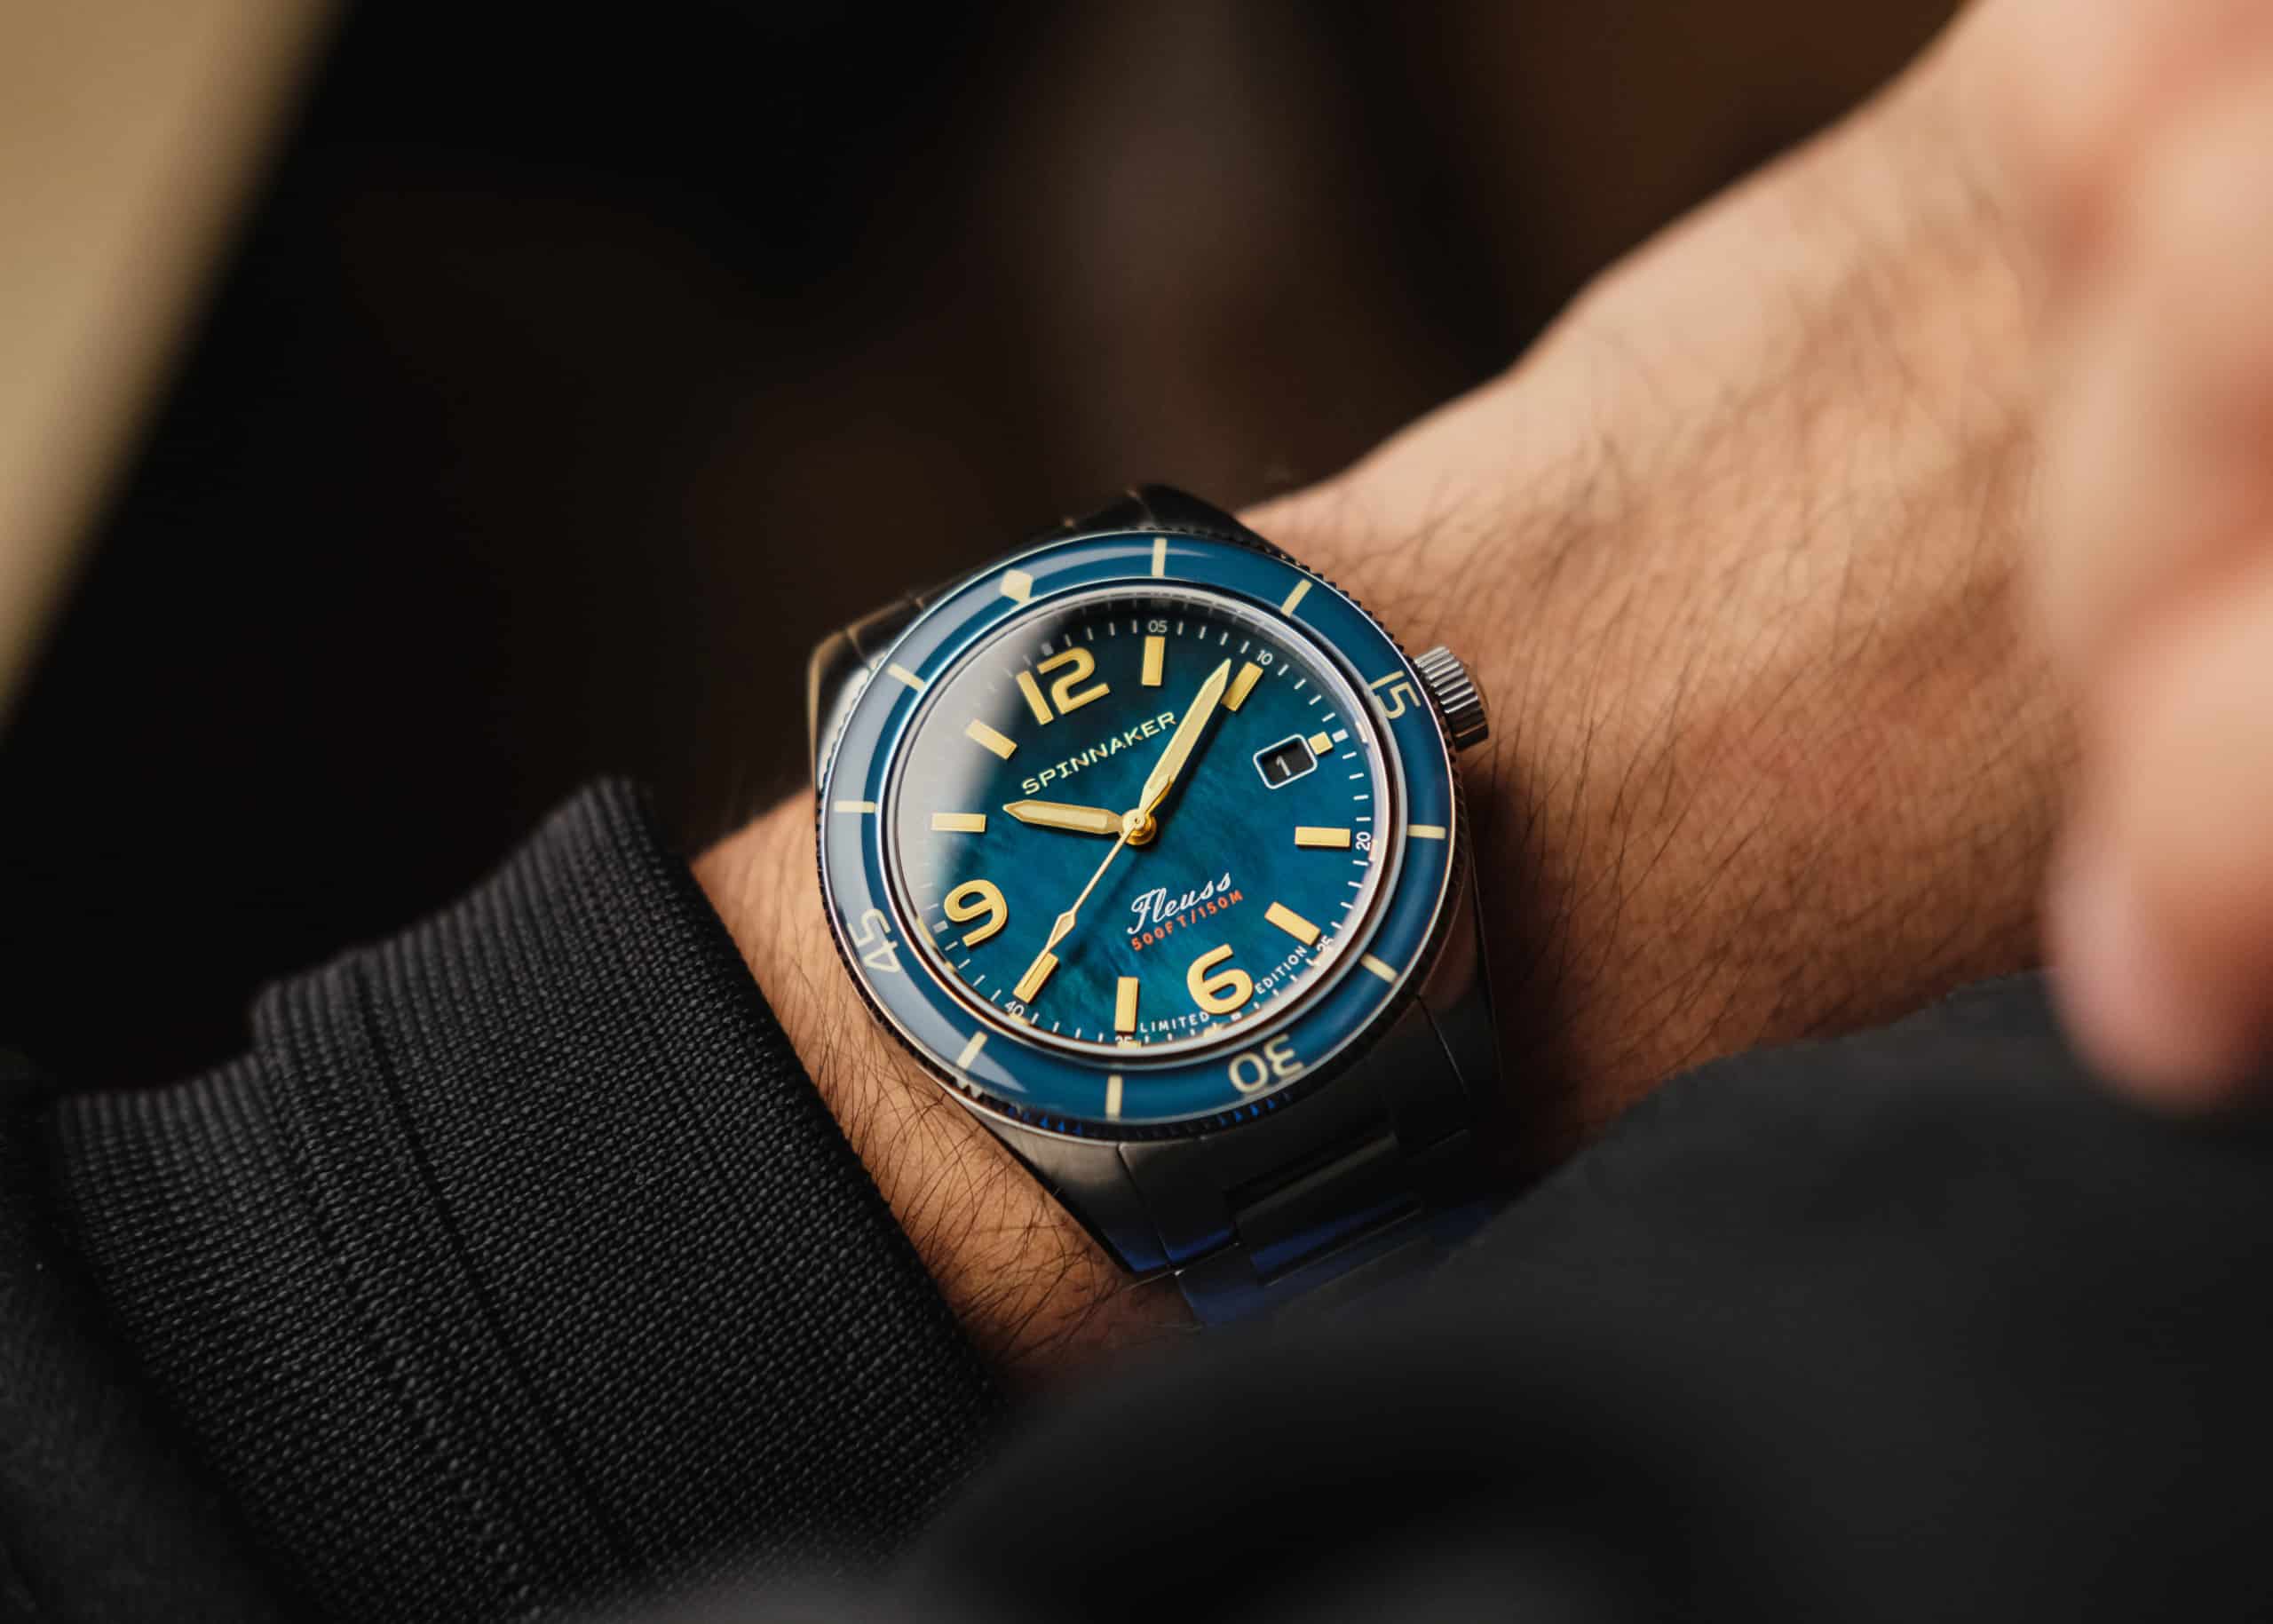 Ama Pearl Divers Inspire Spinnaker’s Latest Fleuss Diver Limited Edition